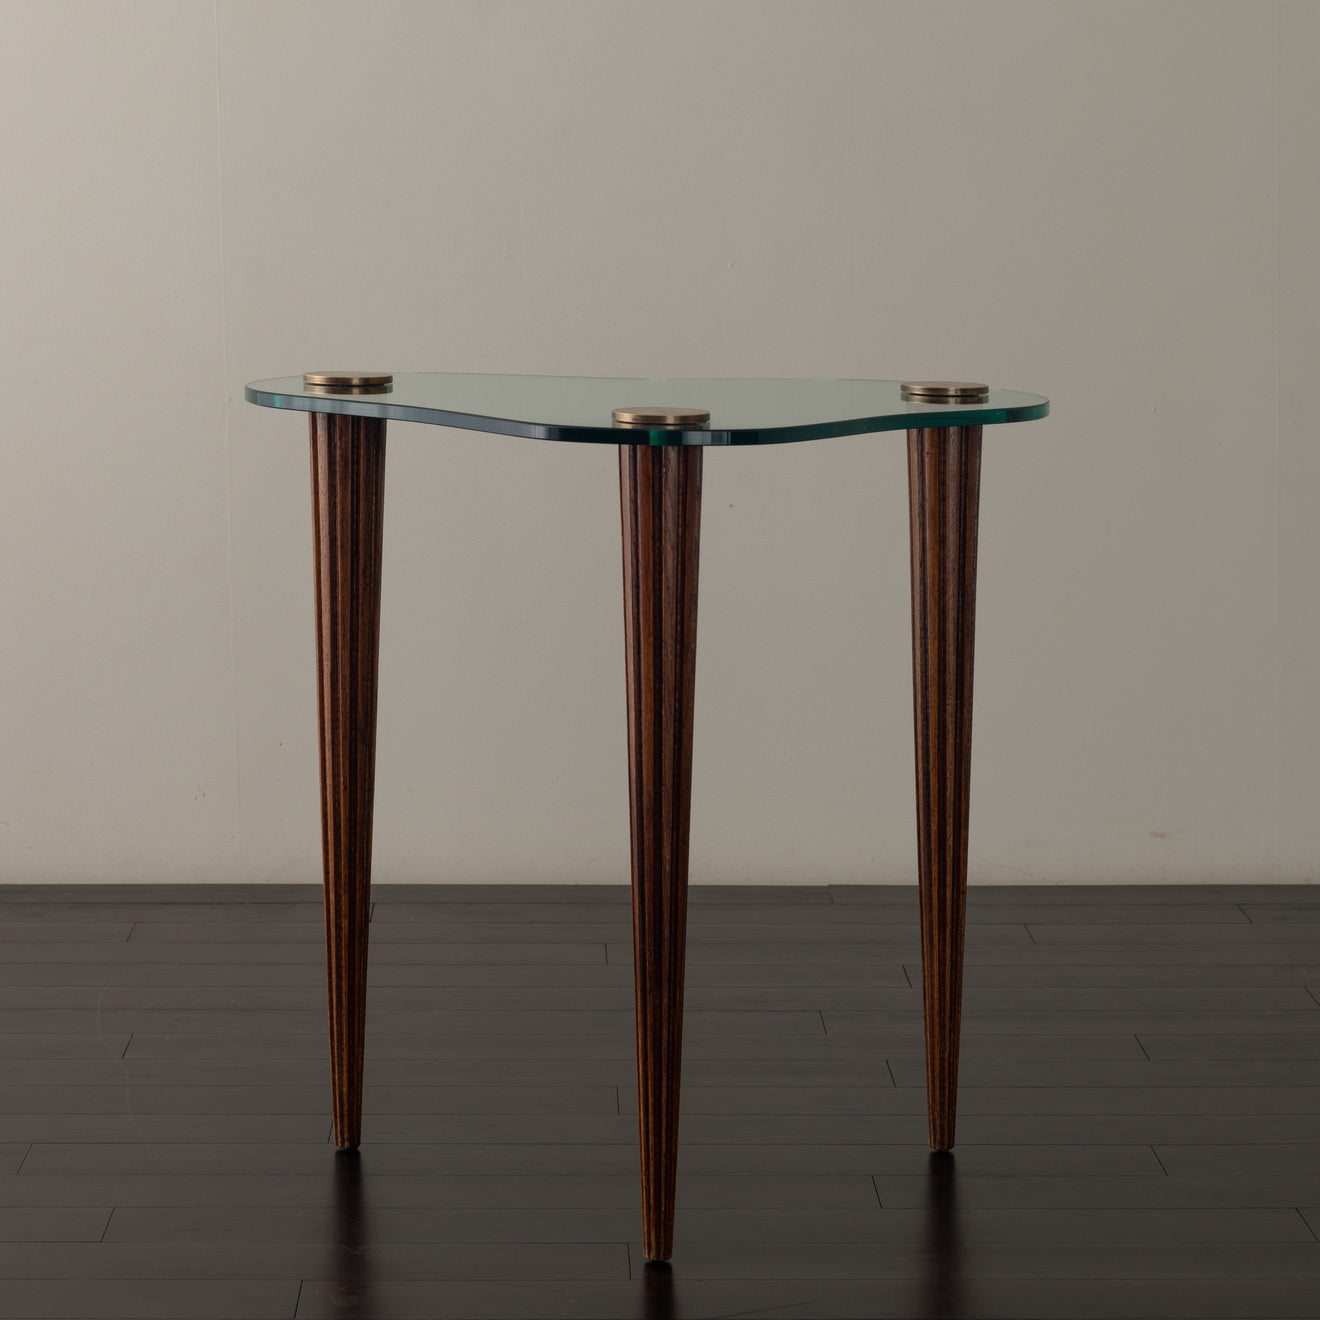 CLOUD TABLE BY GILBERT ROHDE